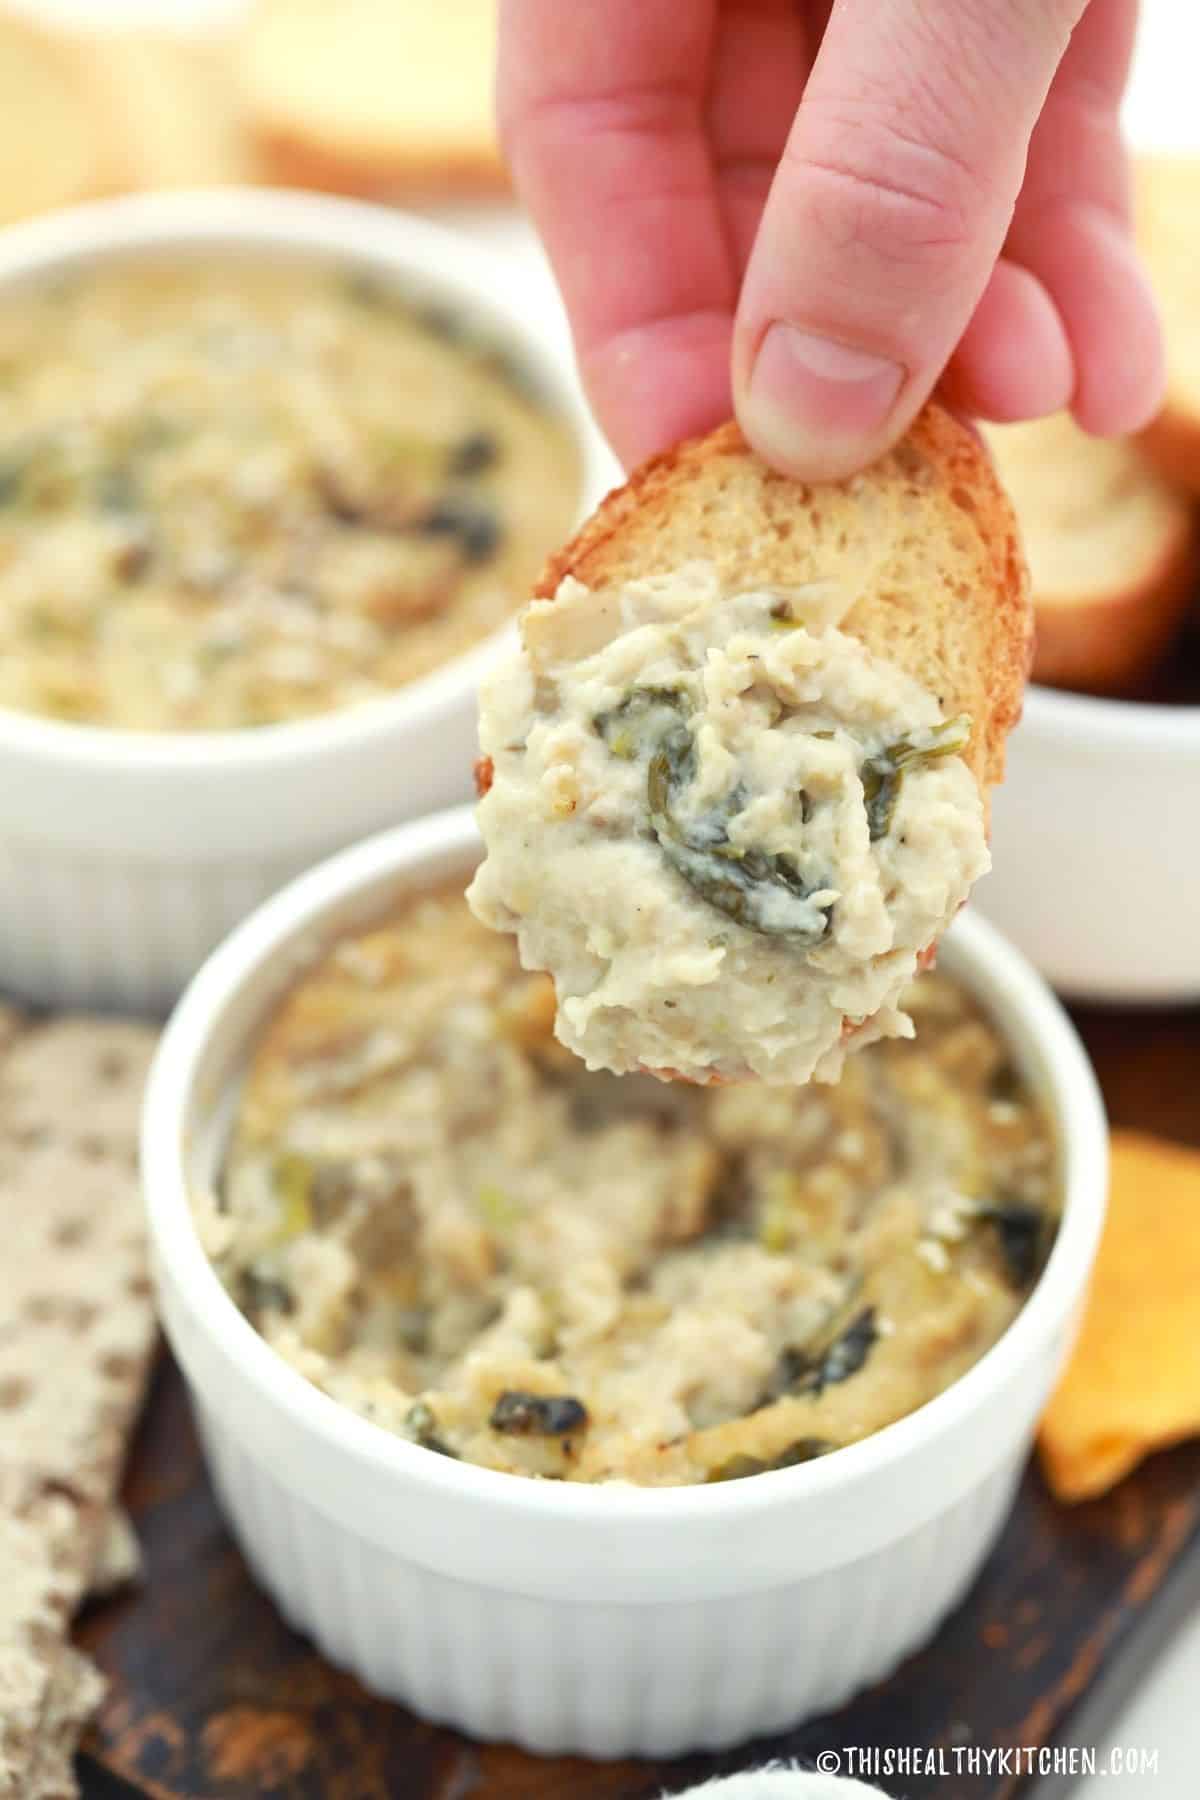 Crostini dipped in creamy white dip ribboned with spinach.